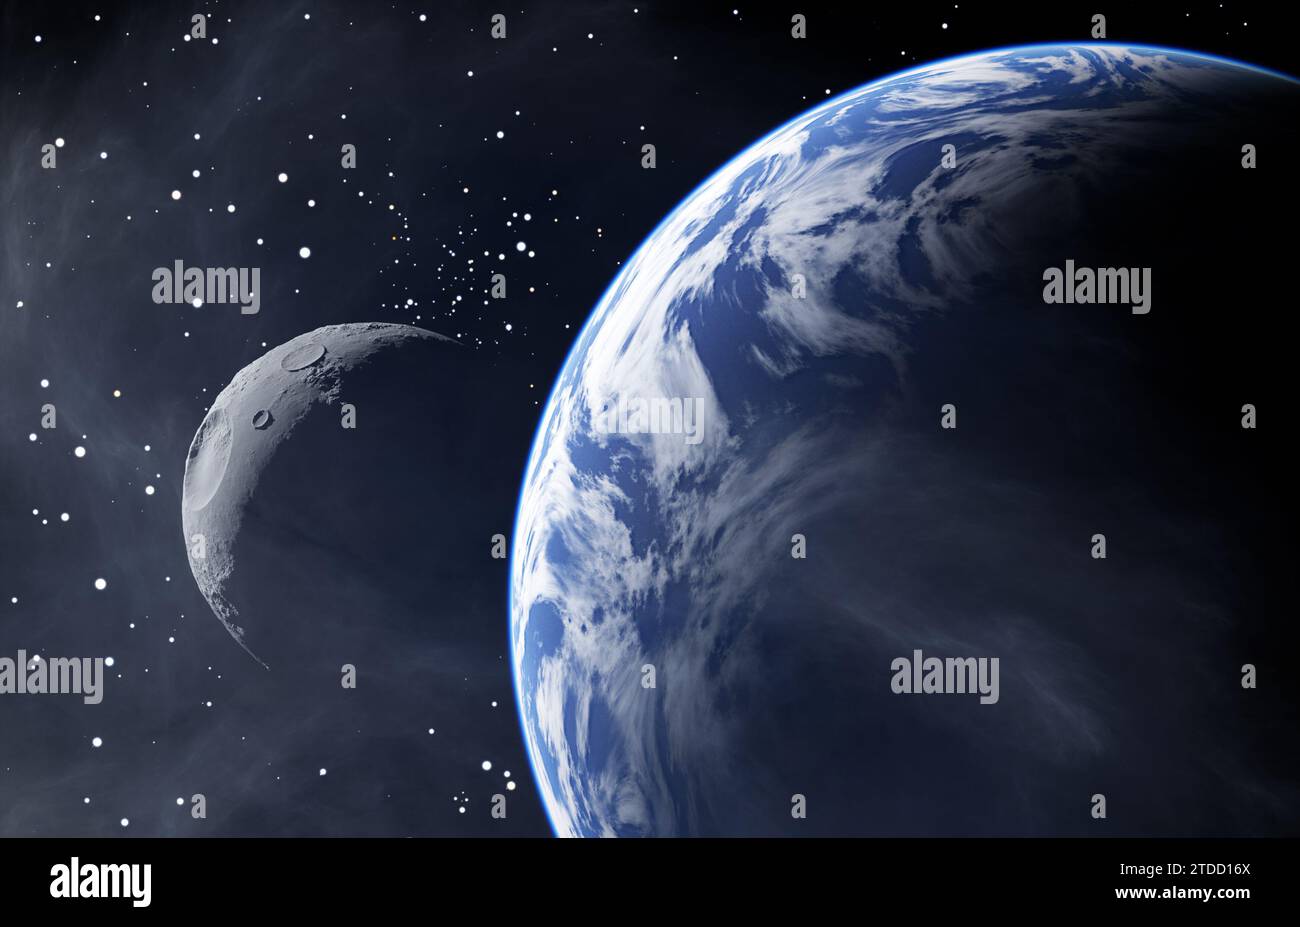 Earth Like Planet with a Moon, 3d illustration Stock Photo